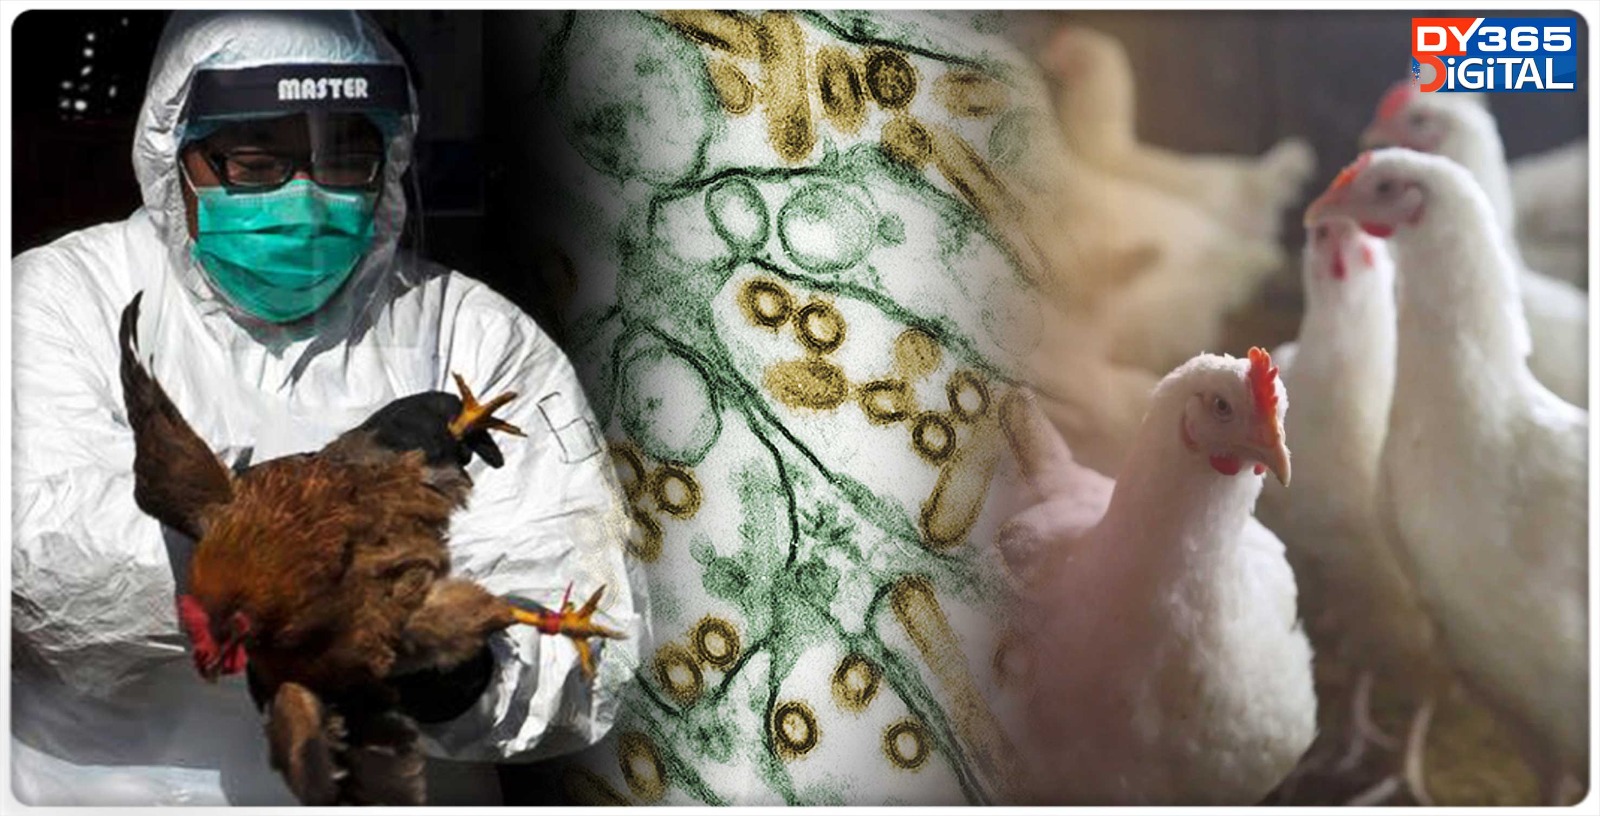 h5n1-bird-flu-pandemic-might-be-100-times-worse-than-covid--says-experts-